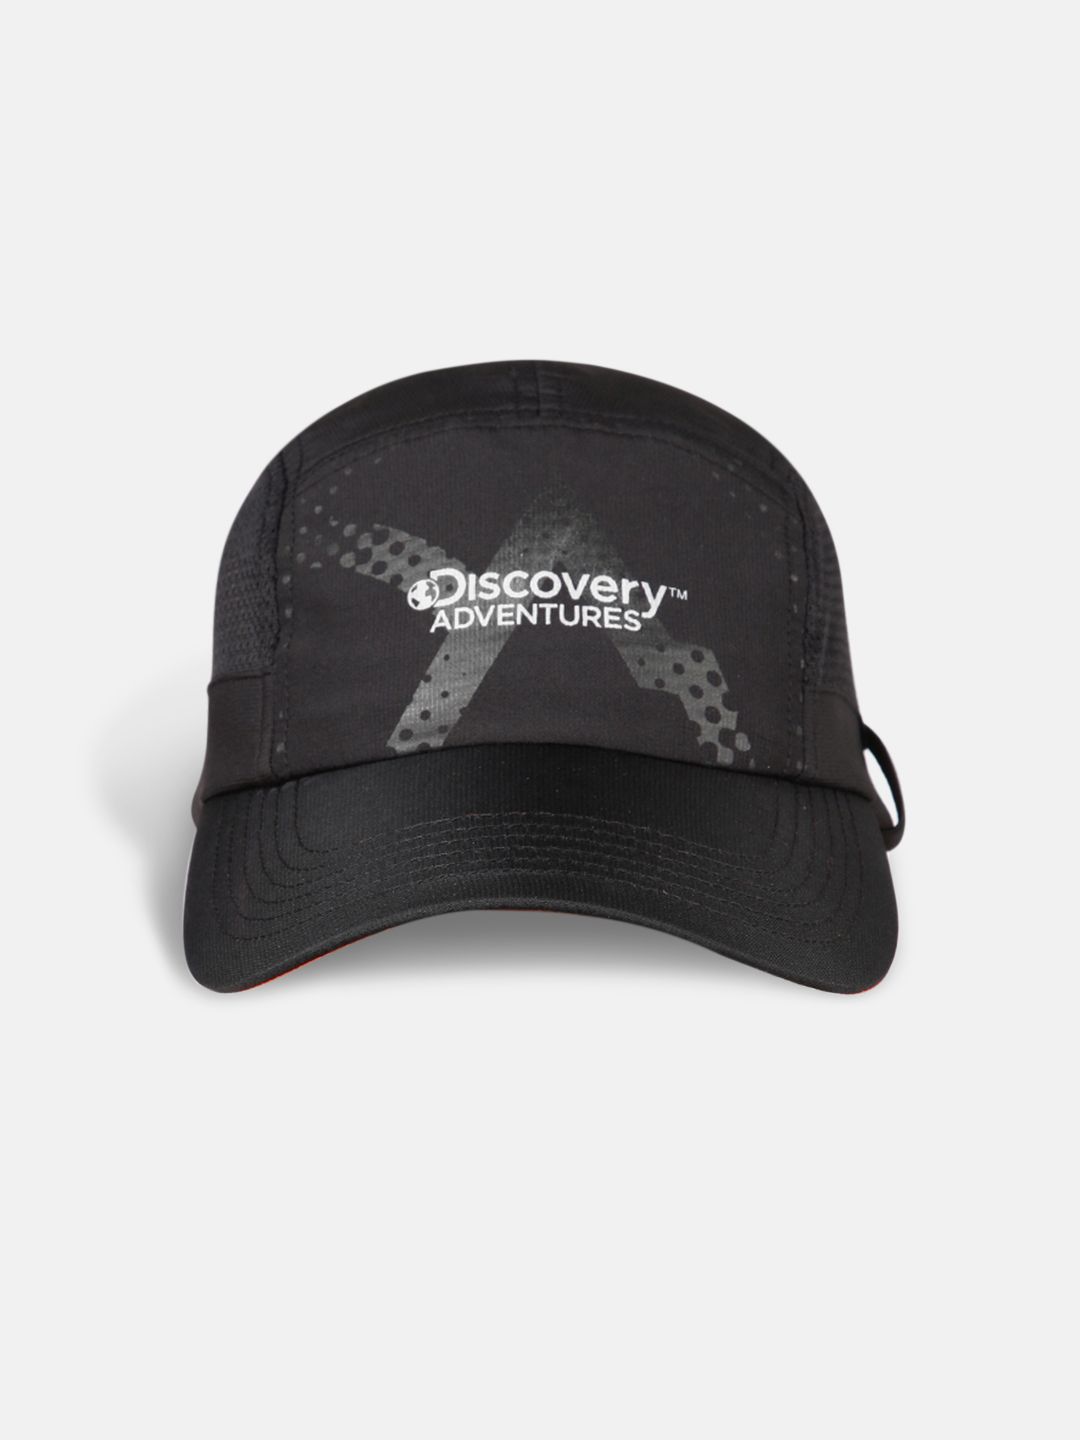 Roadster Unisex Black Printed Discovery Baseball Cap Price in India